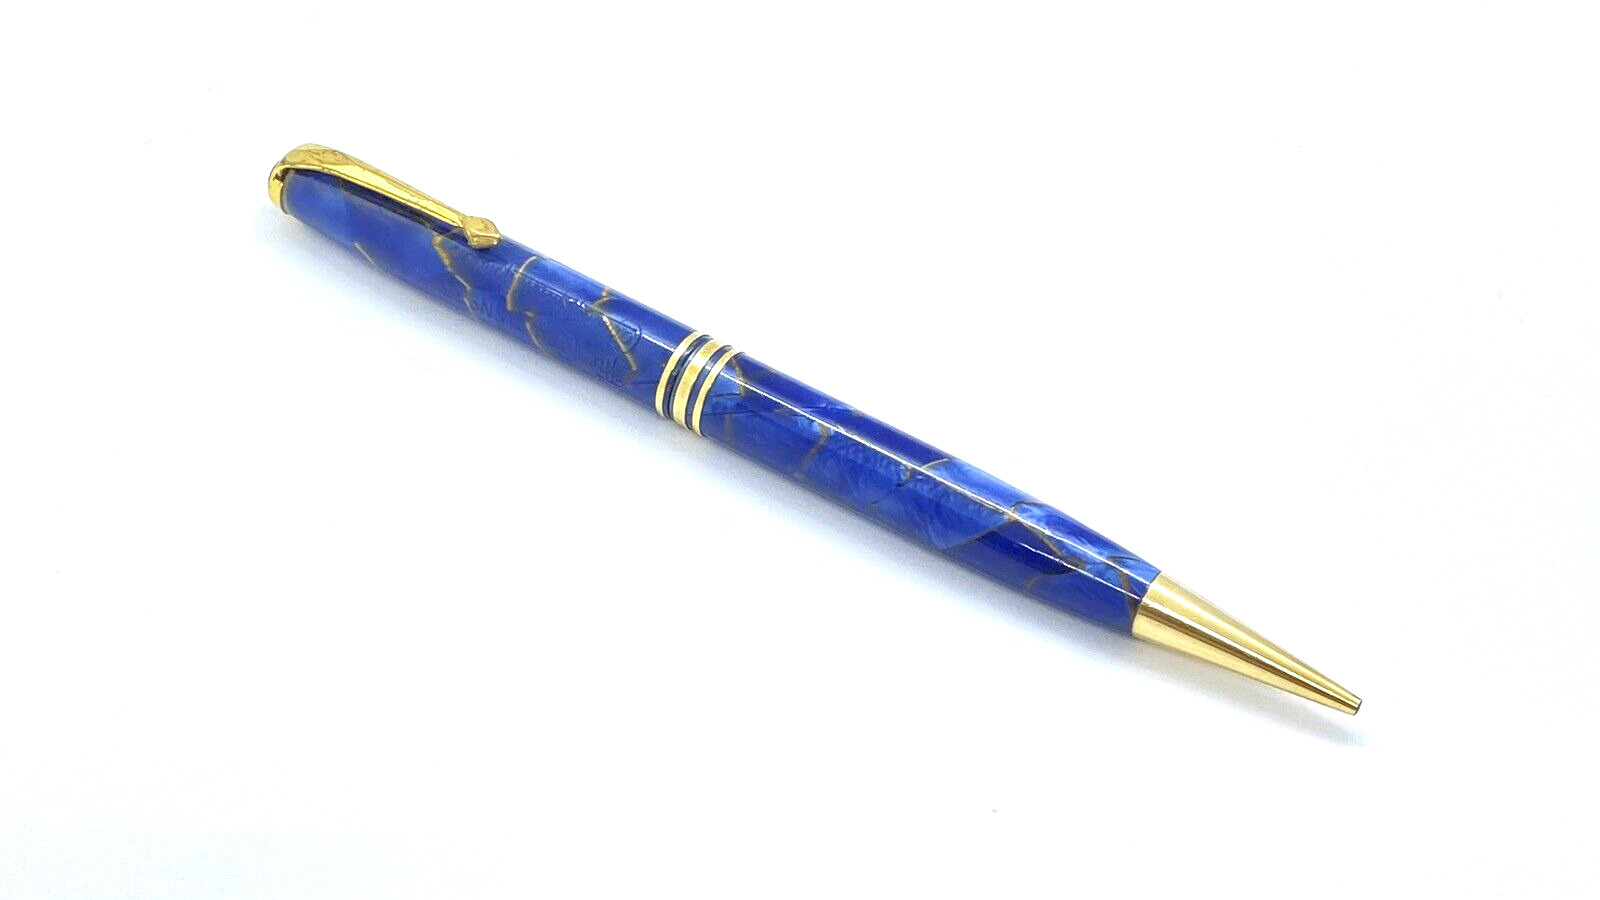 VINTAGE THE CONWAY NO 33 PENCIL IN YELLOW VEINED BLUE MARBLE PAT. APPLIED FOR OC